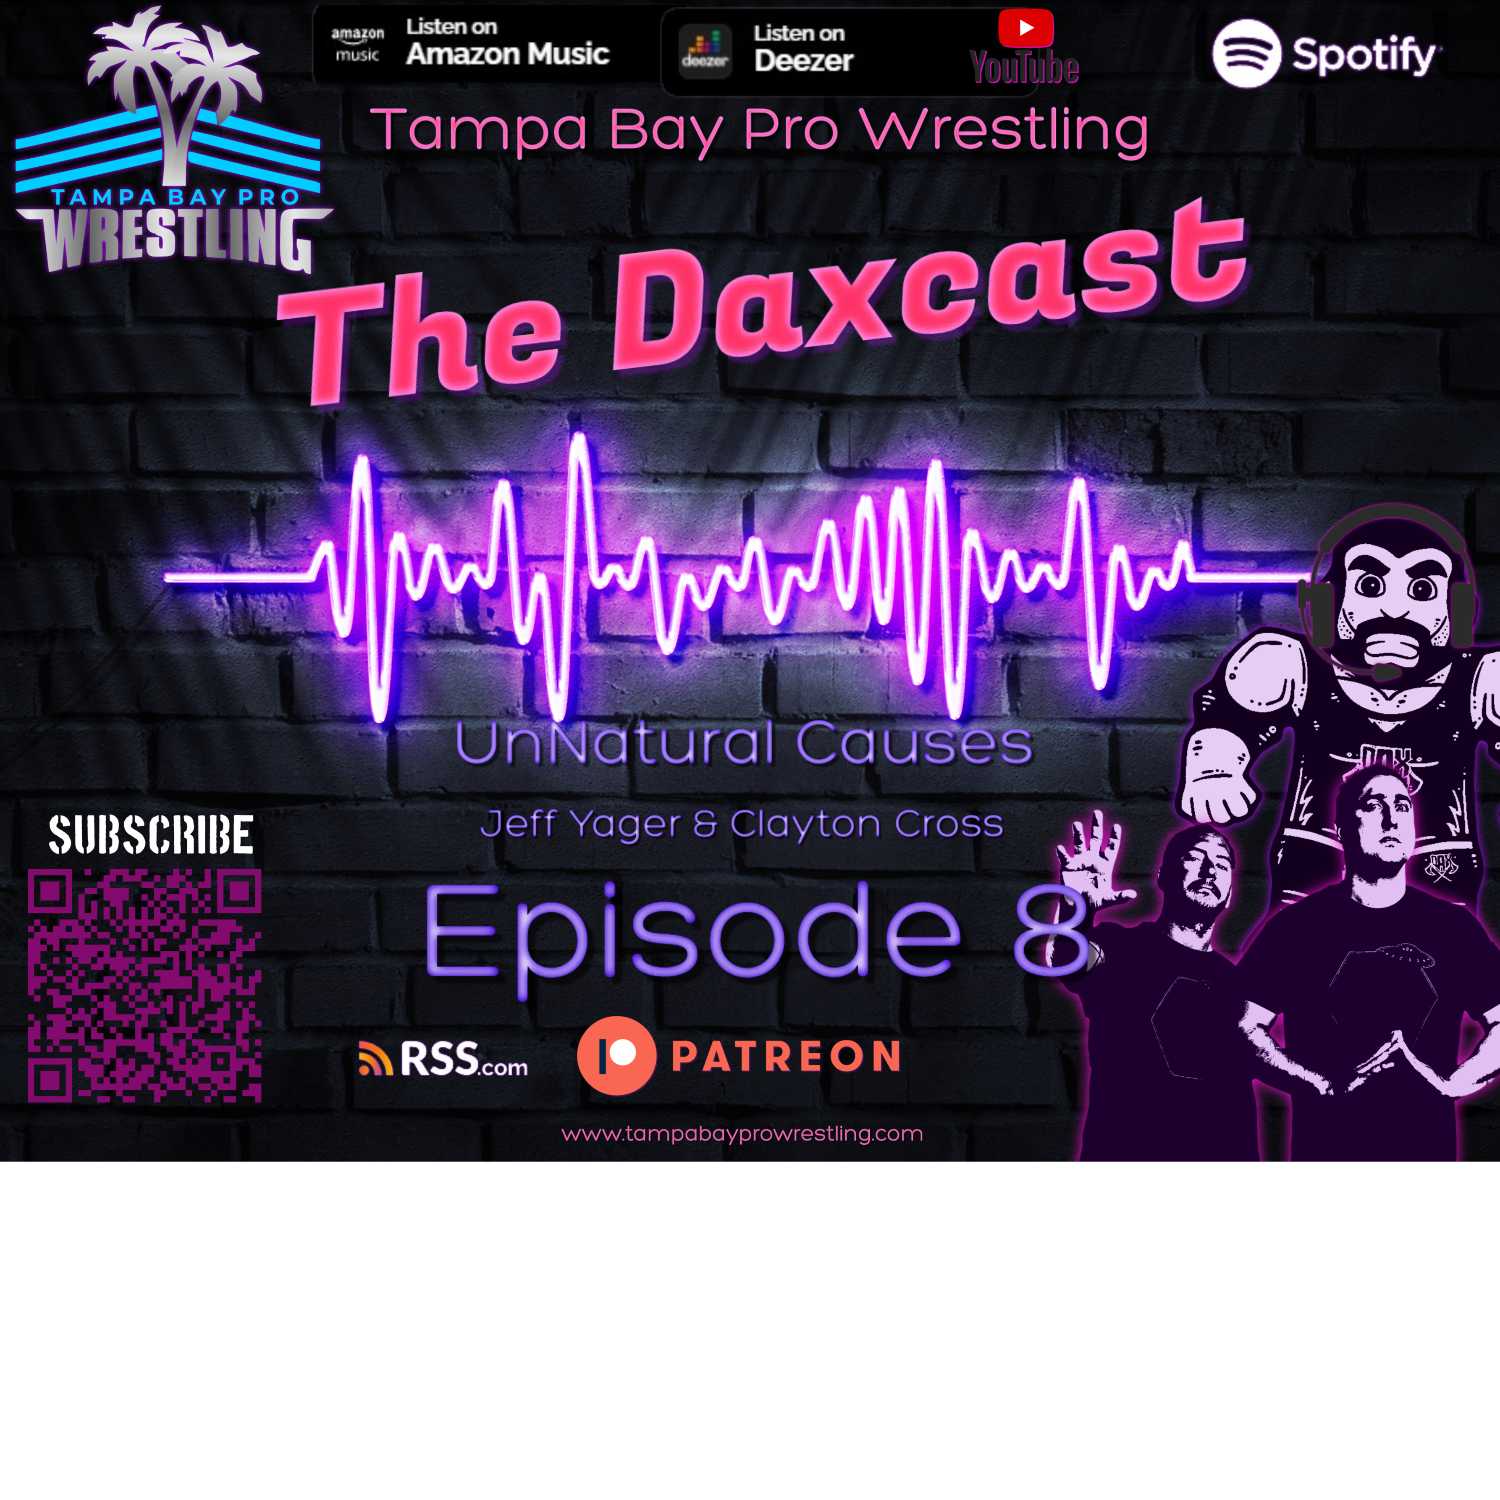 The Daxcast - ep 8 "UnNatural Causes" Jeff Yager & Clayton Cross